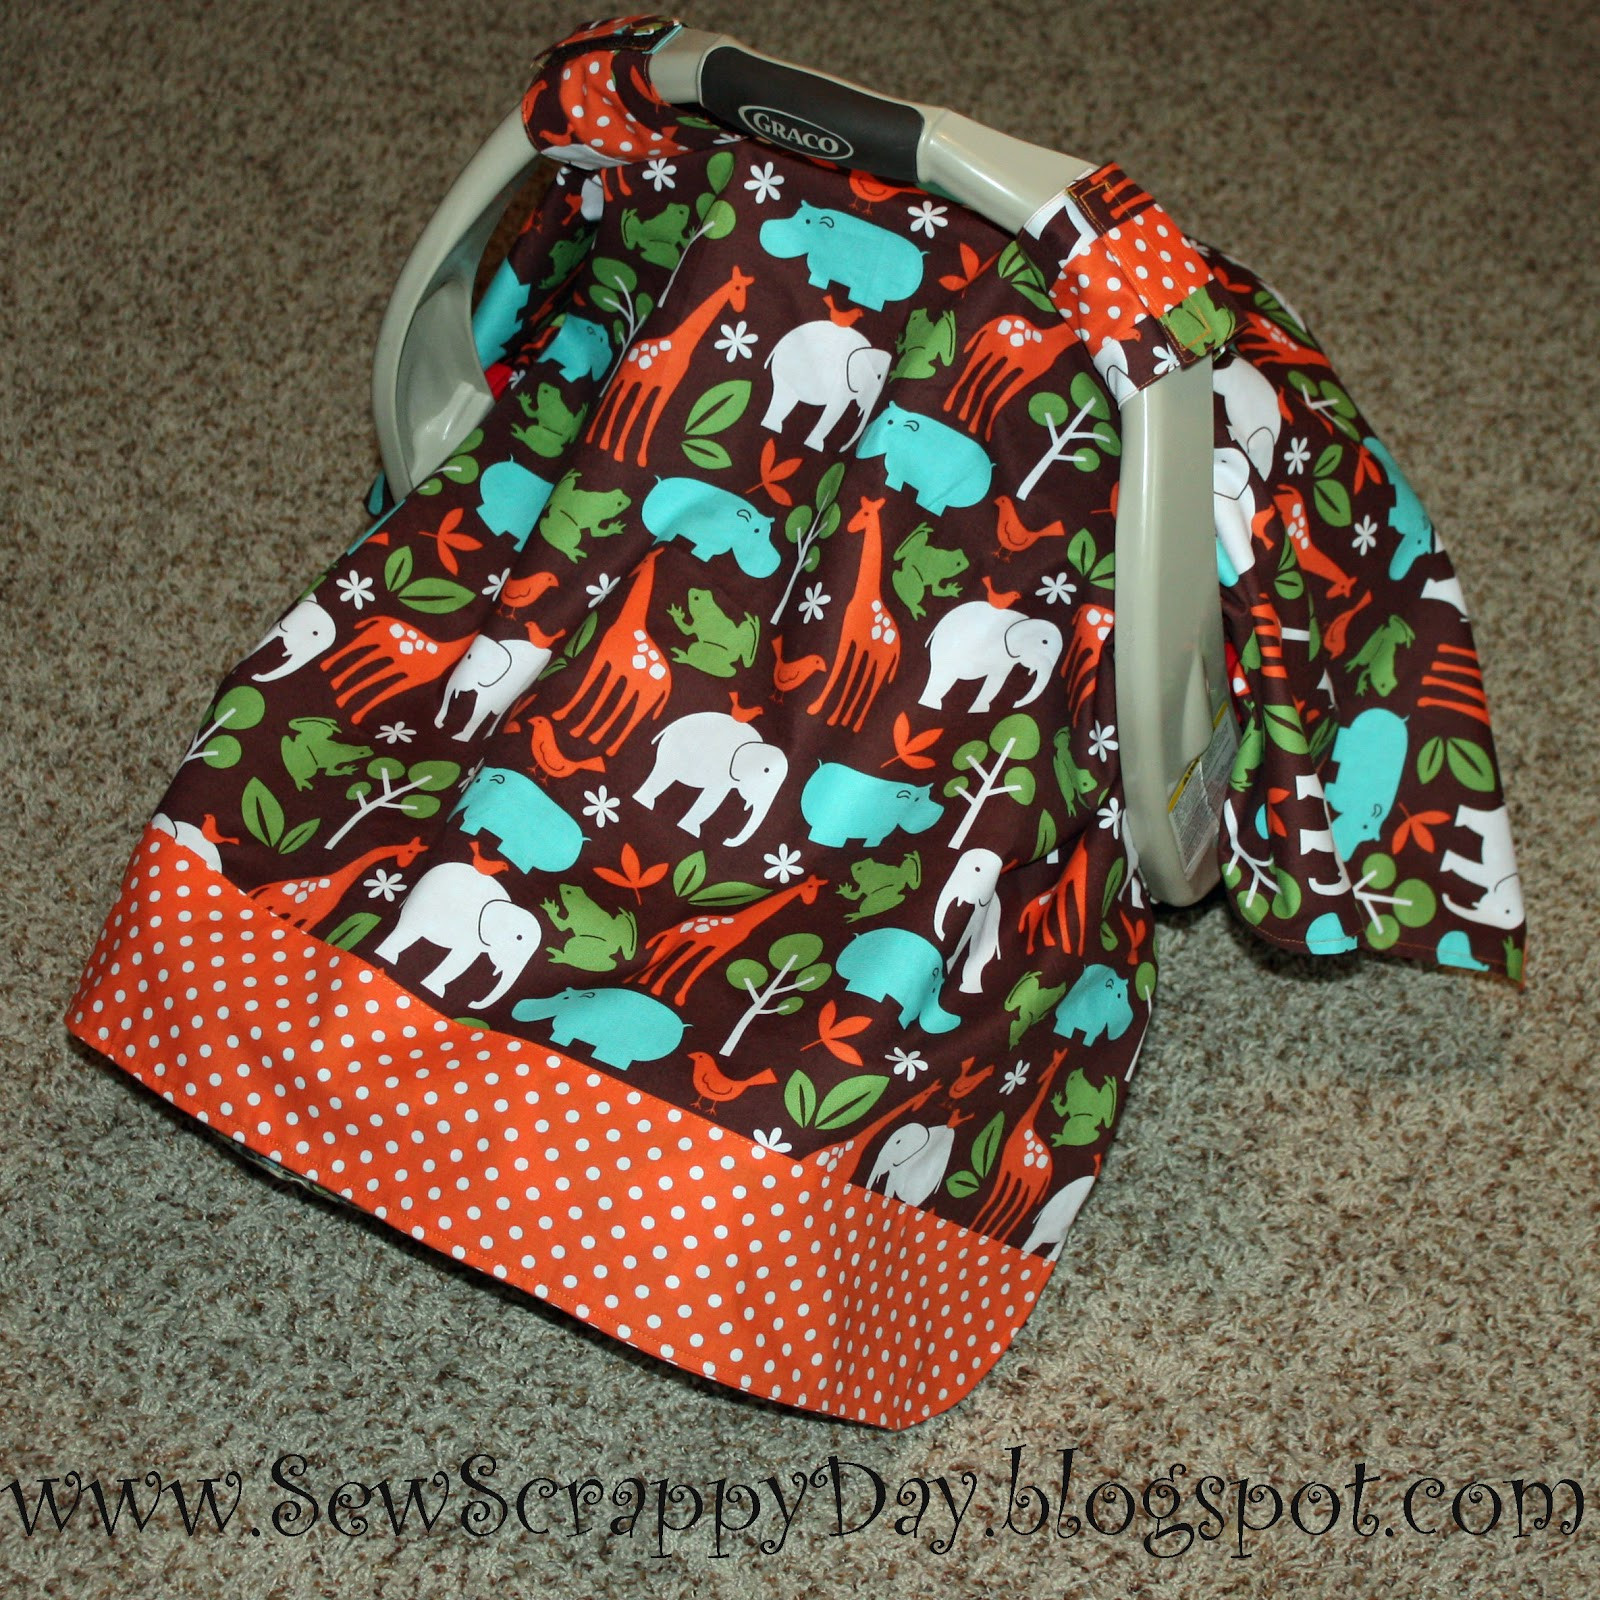 DIY Baby Carrier Cover
 Sew Scrappy Day DIY Infant Carrier Cover Perfect for